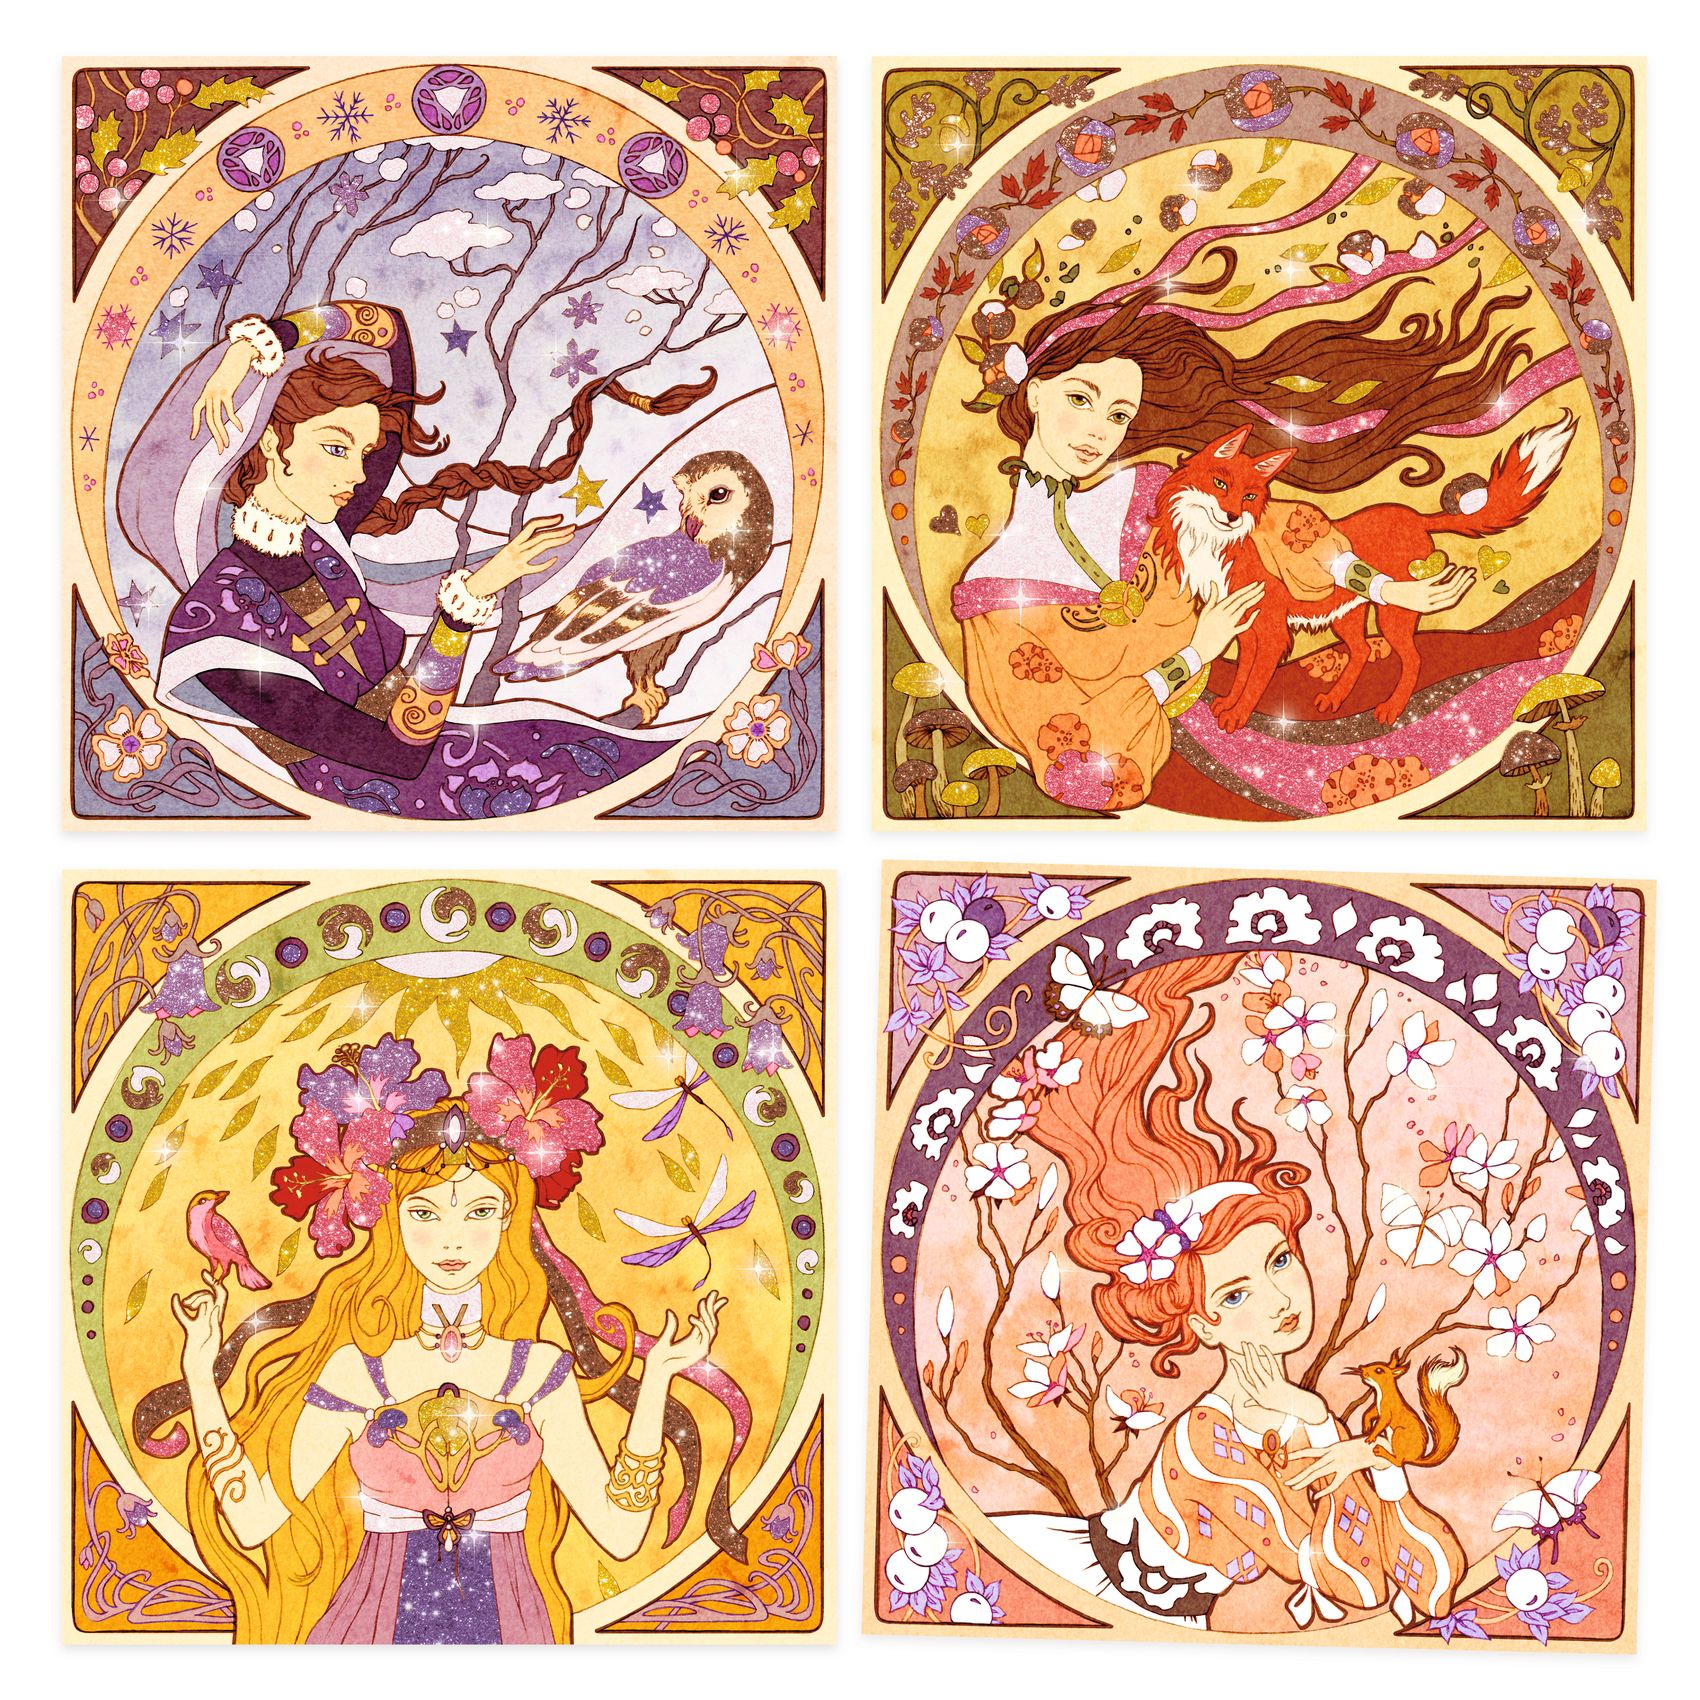 goddesses inspired by Alfons Mucha by Djeco